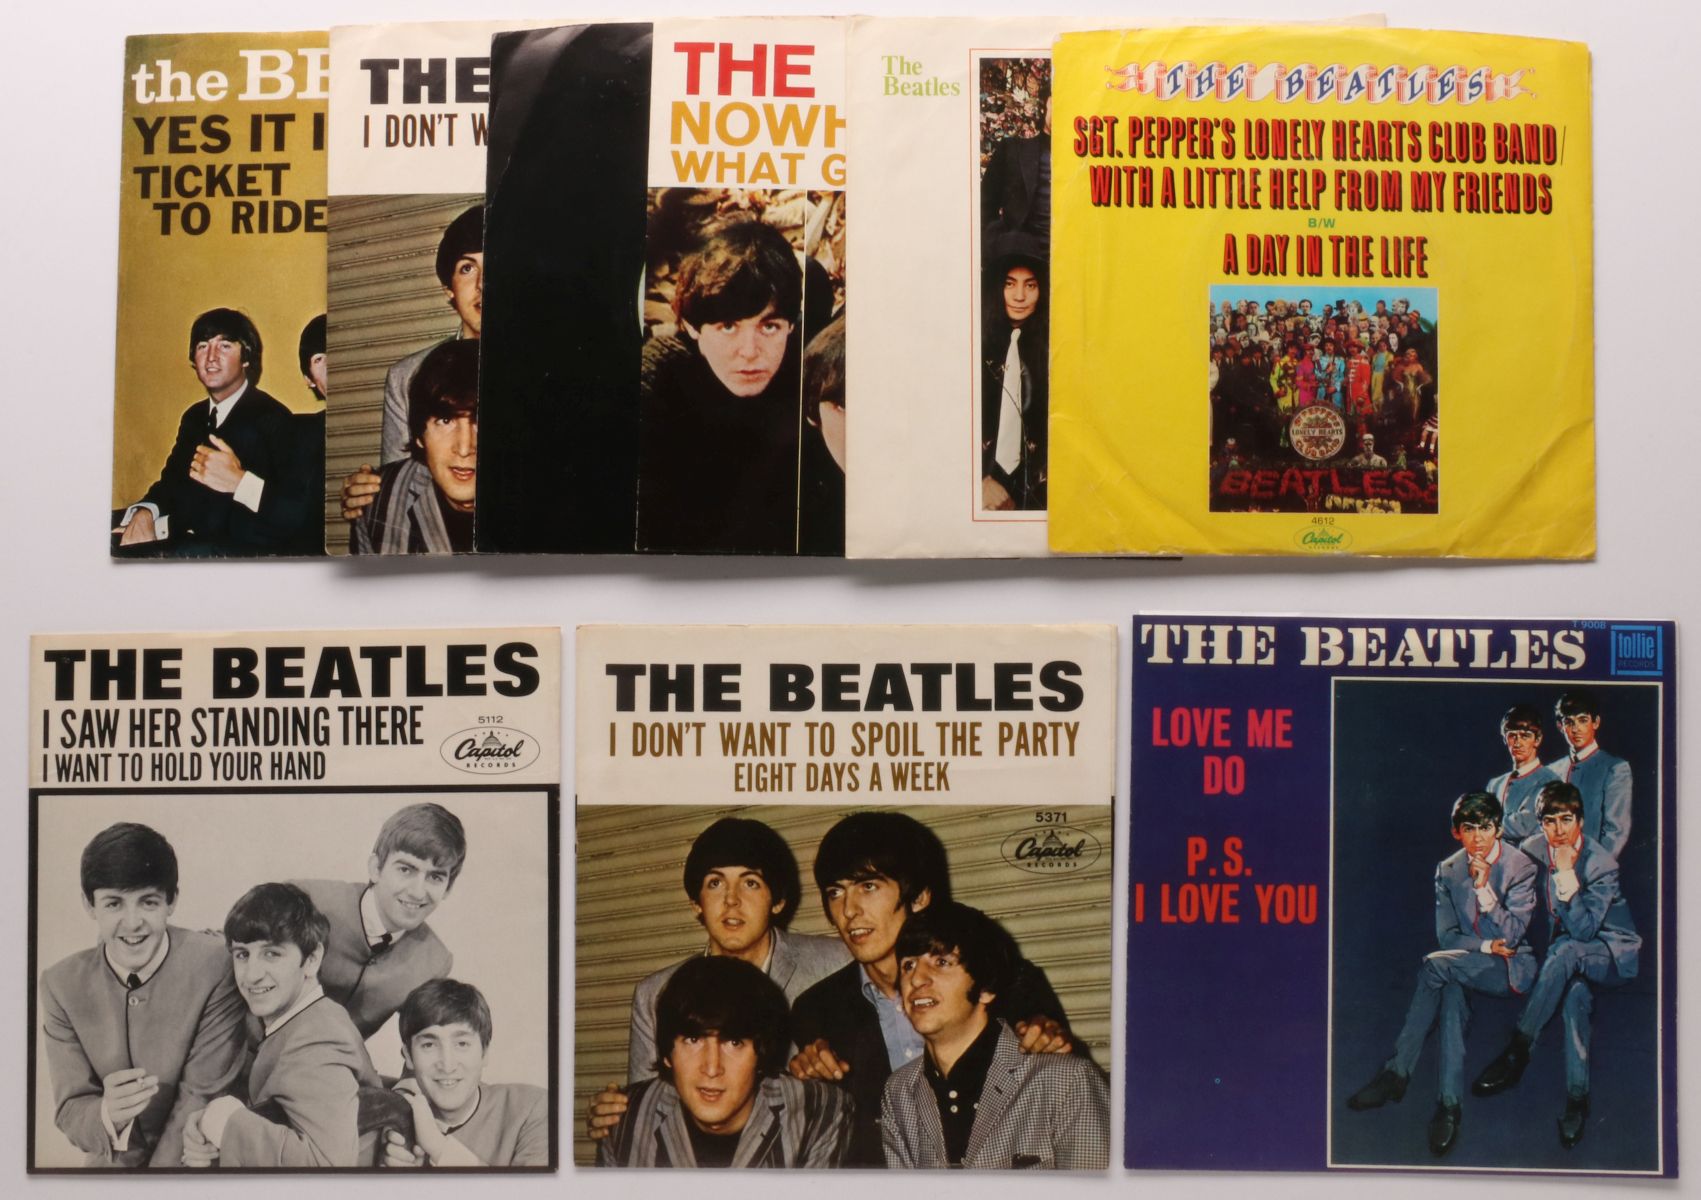 A COLLECTION OF BEATLES 45 RPM RECORDS AND SLEEVES